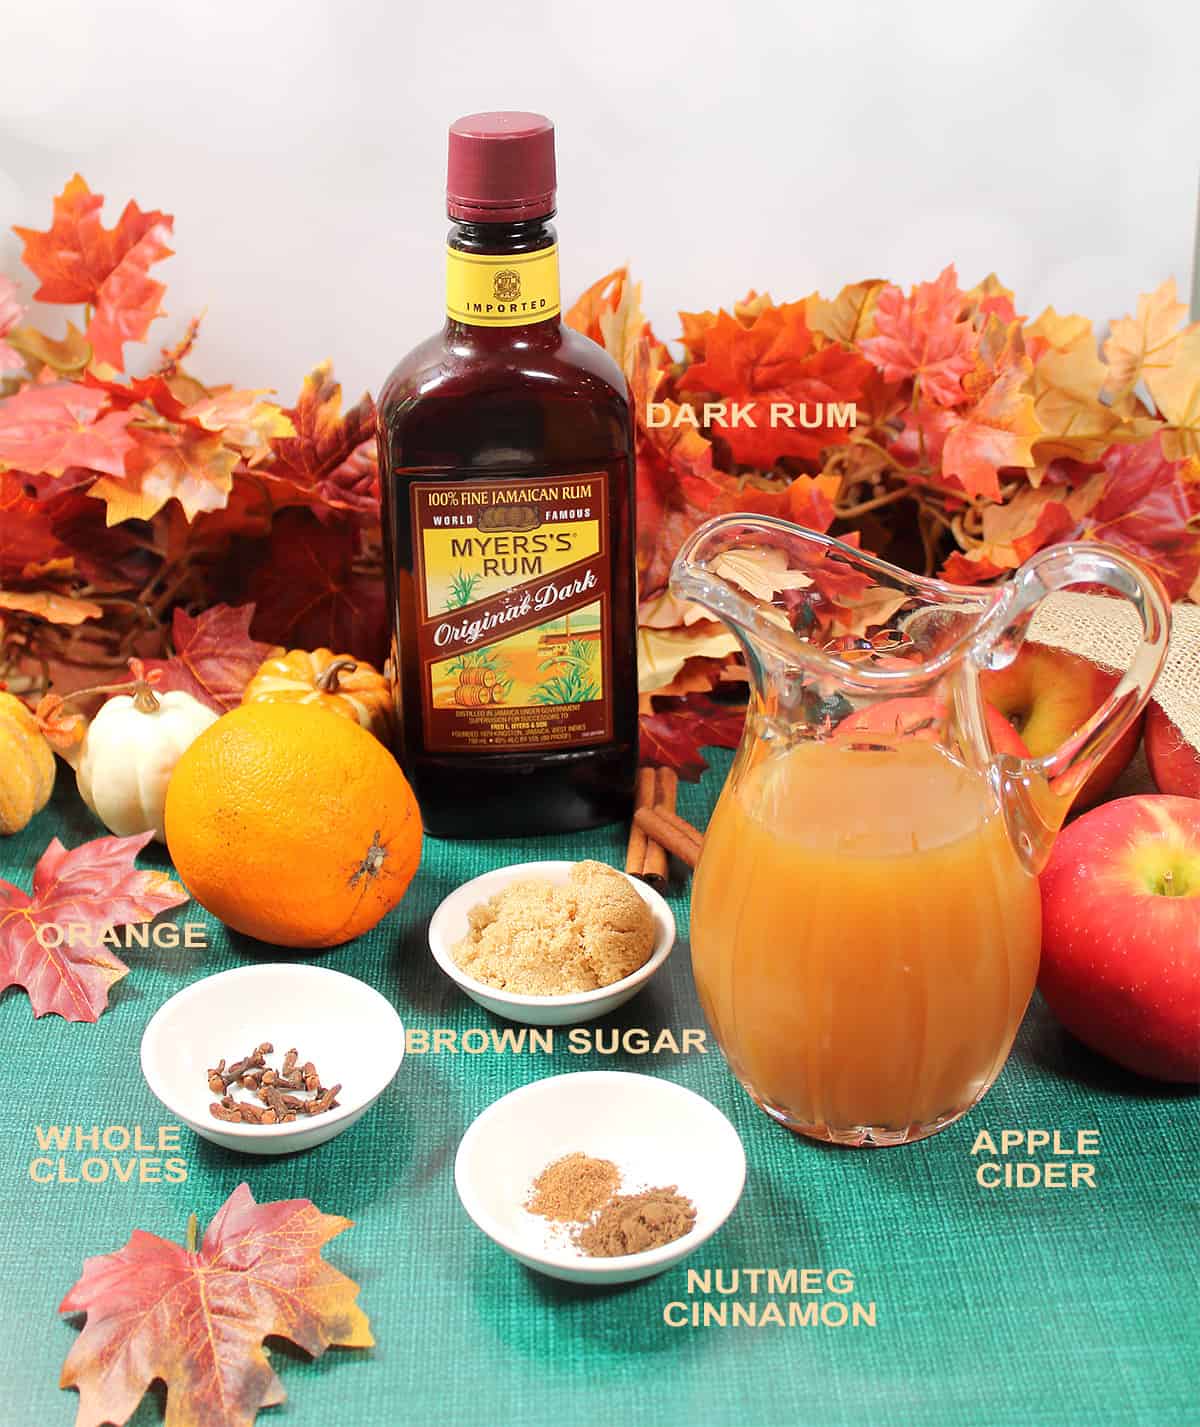 https://2cookinmamas.com/wp-content/uploads/2022/10/Spiked-Apple-Cider-ingredients.jpg